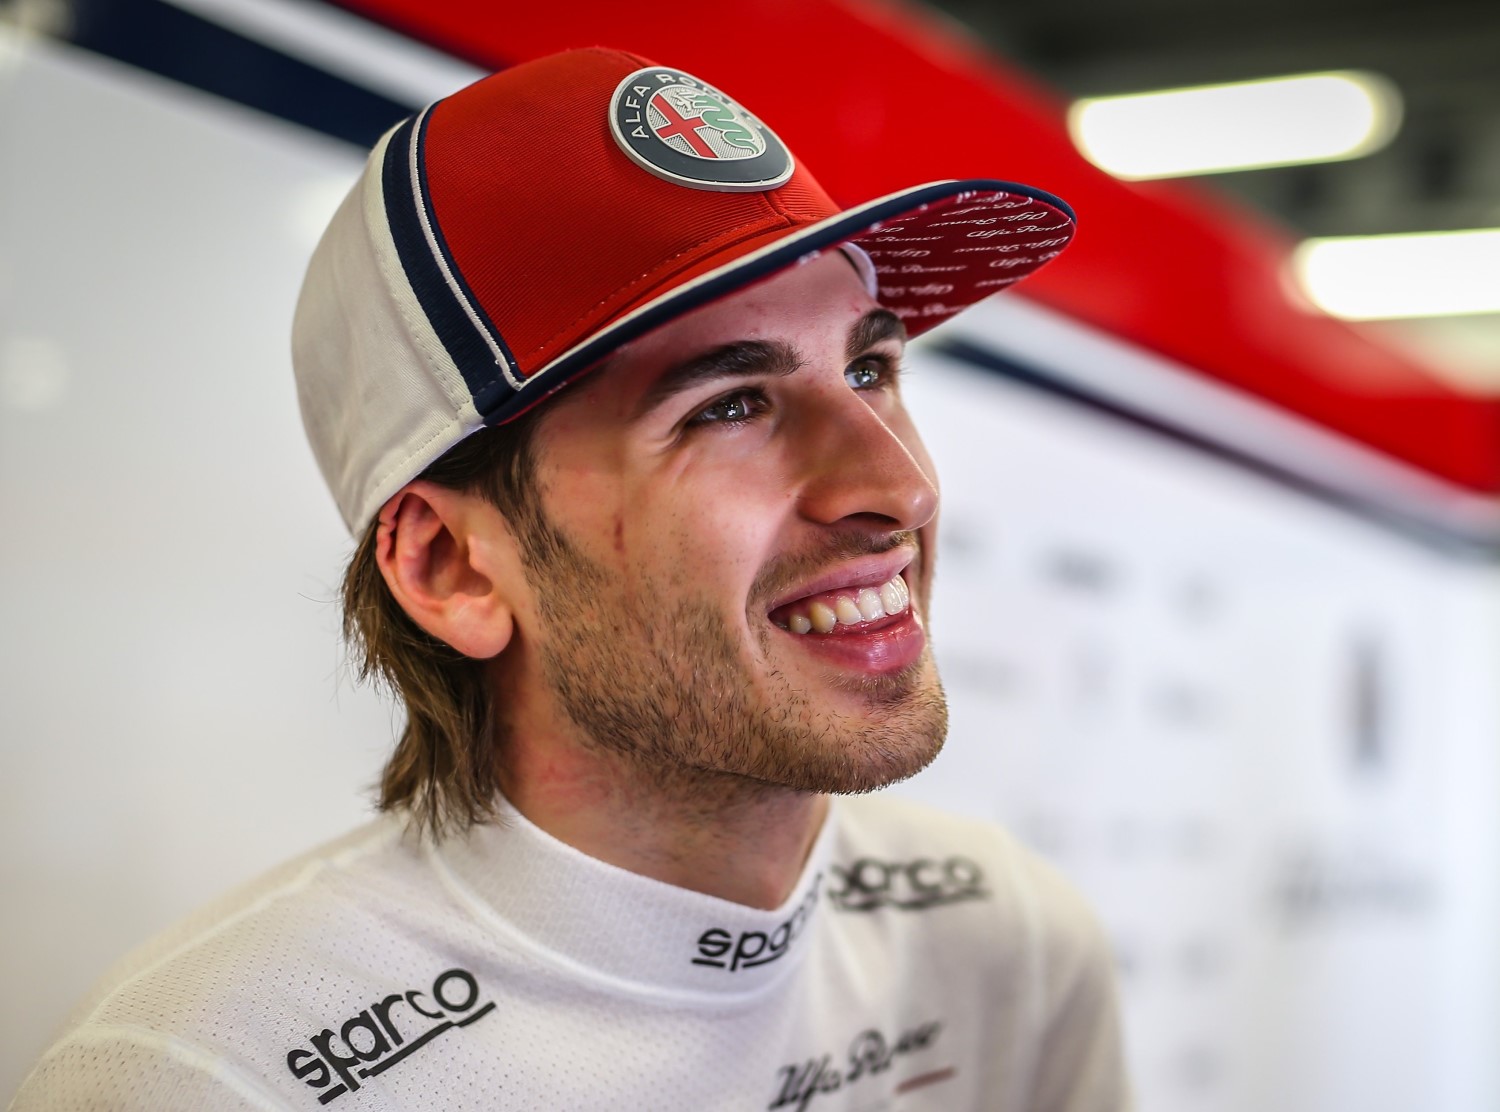 Giovinazzi looks lost and helpless